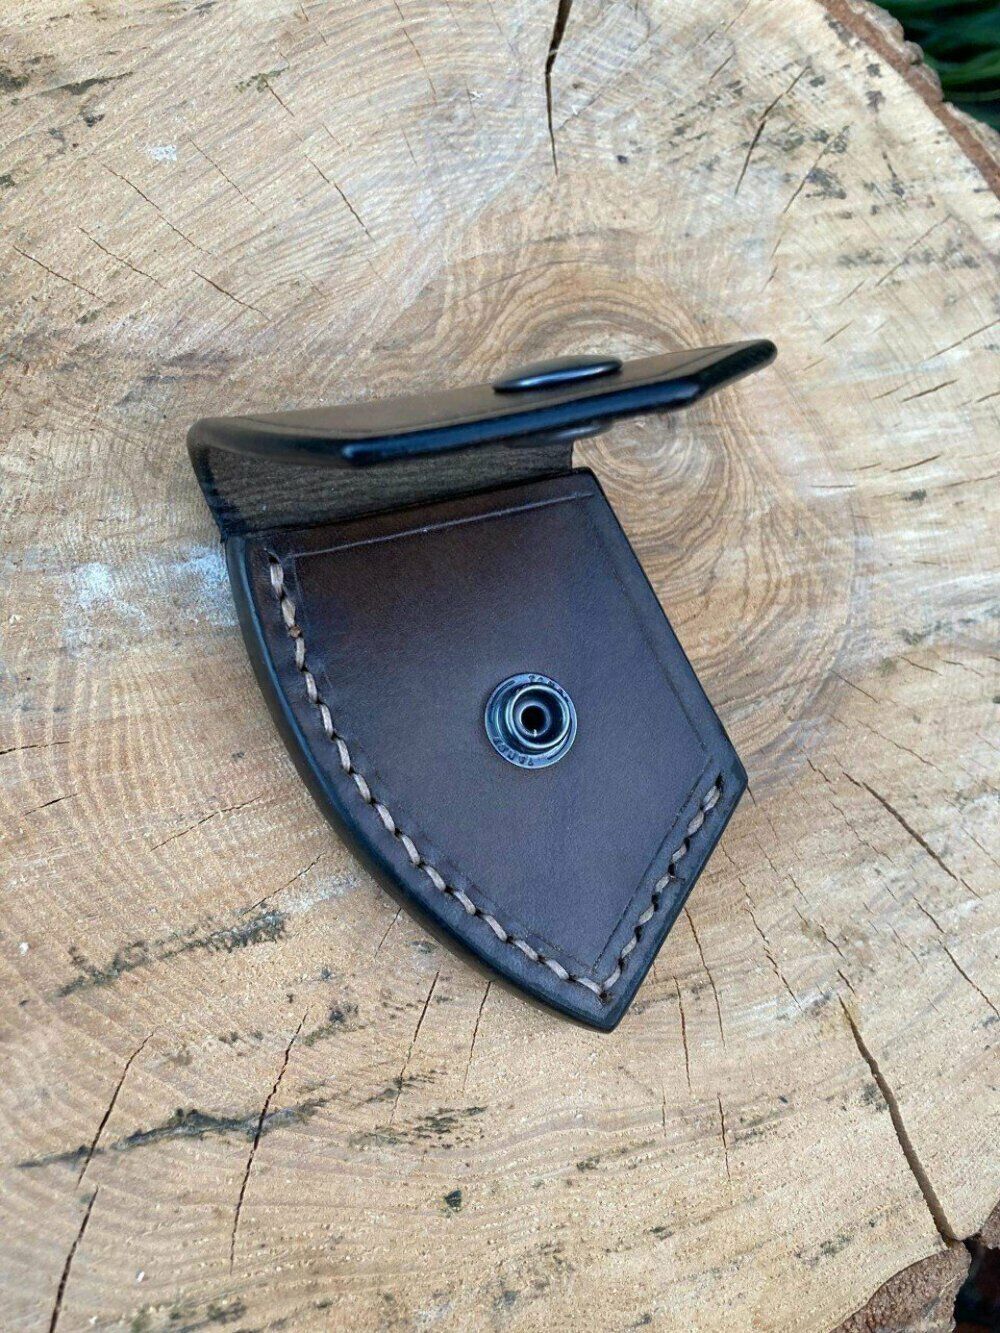 Leather Hultafors Classic Trekking Axe Blade Cover